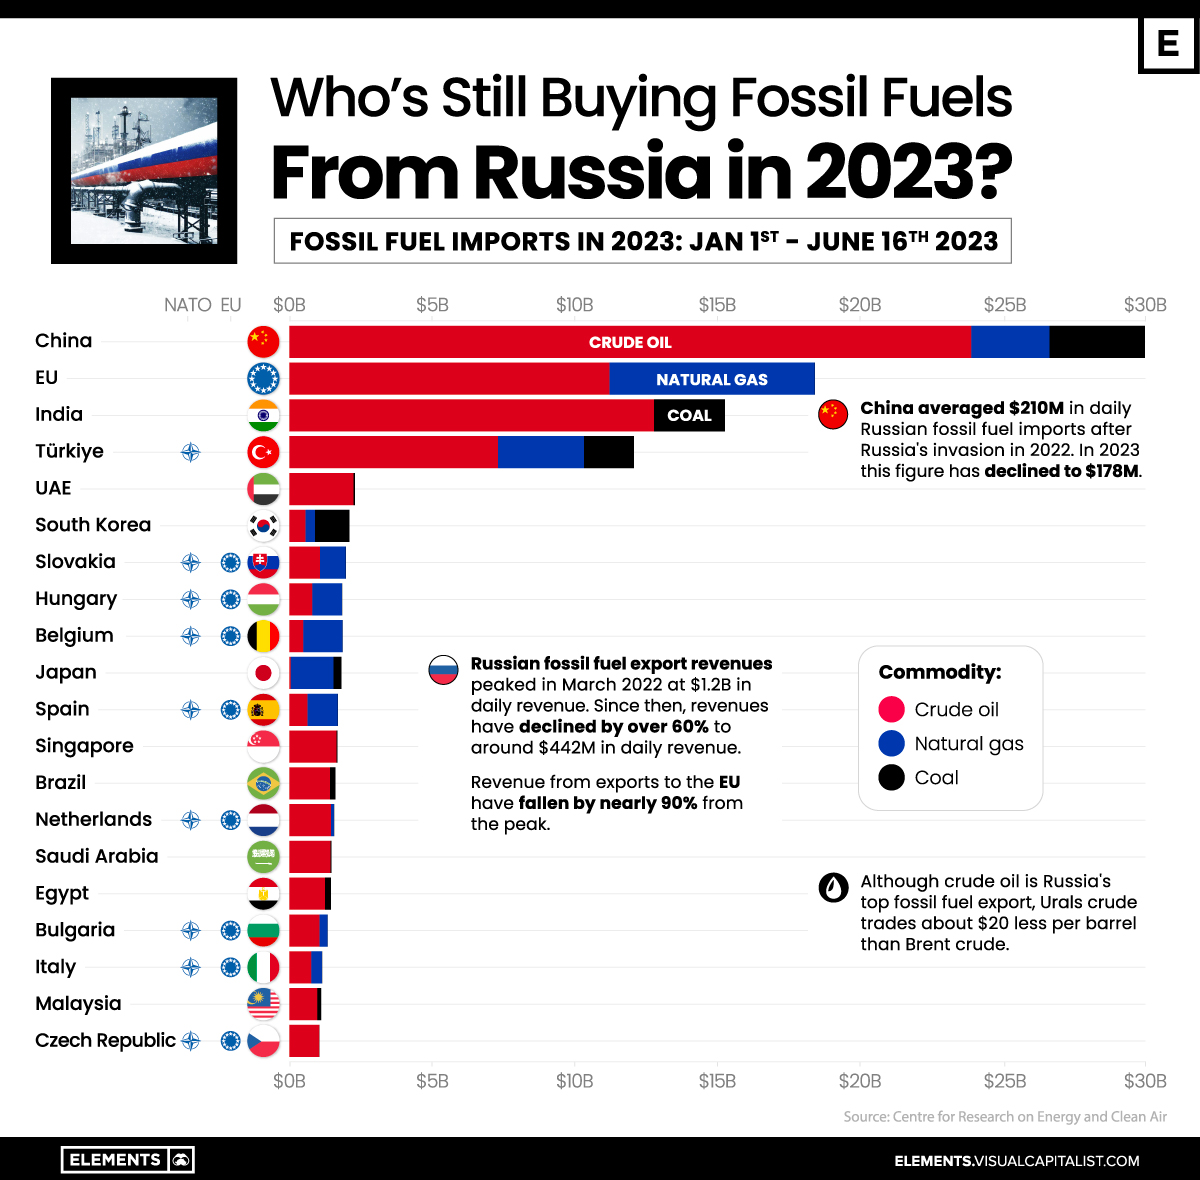 Bar chart of countries with the highest fossil fuel imports from Russia in 2023